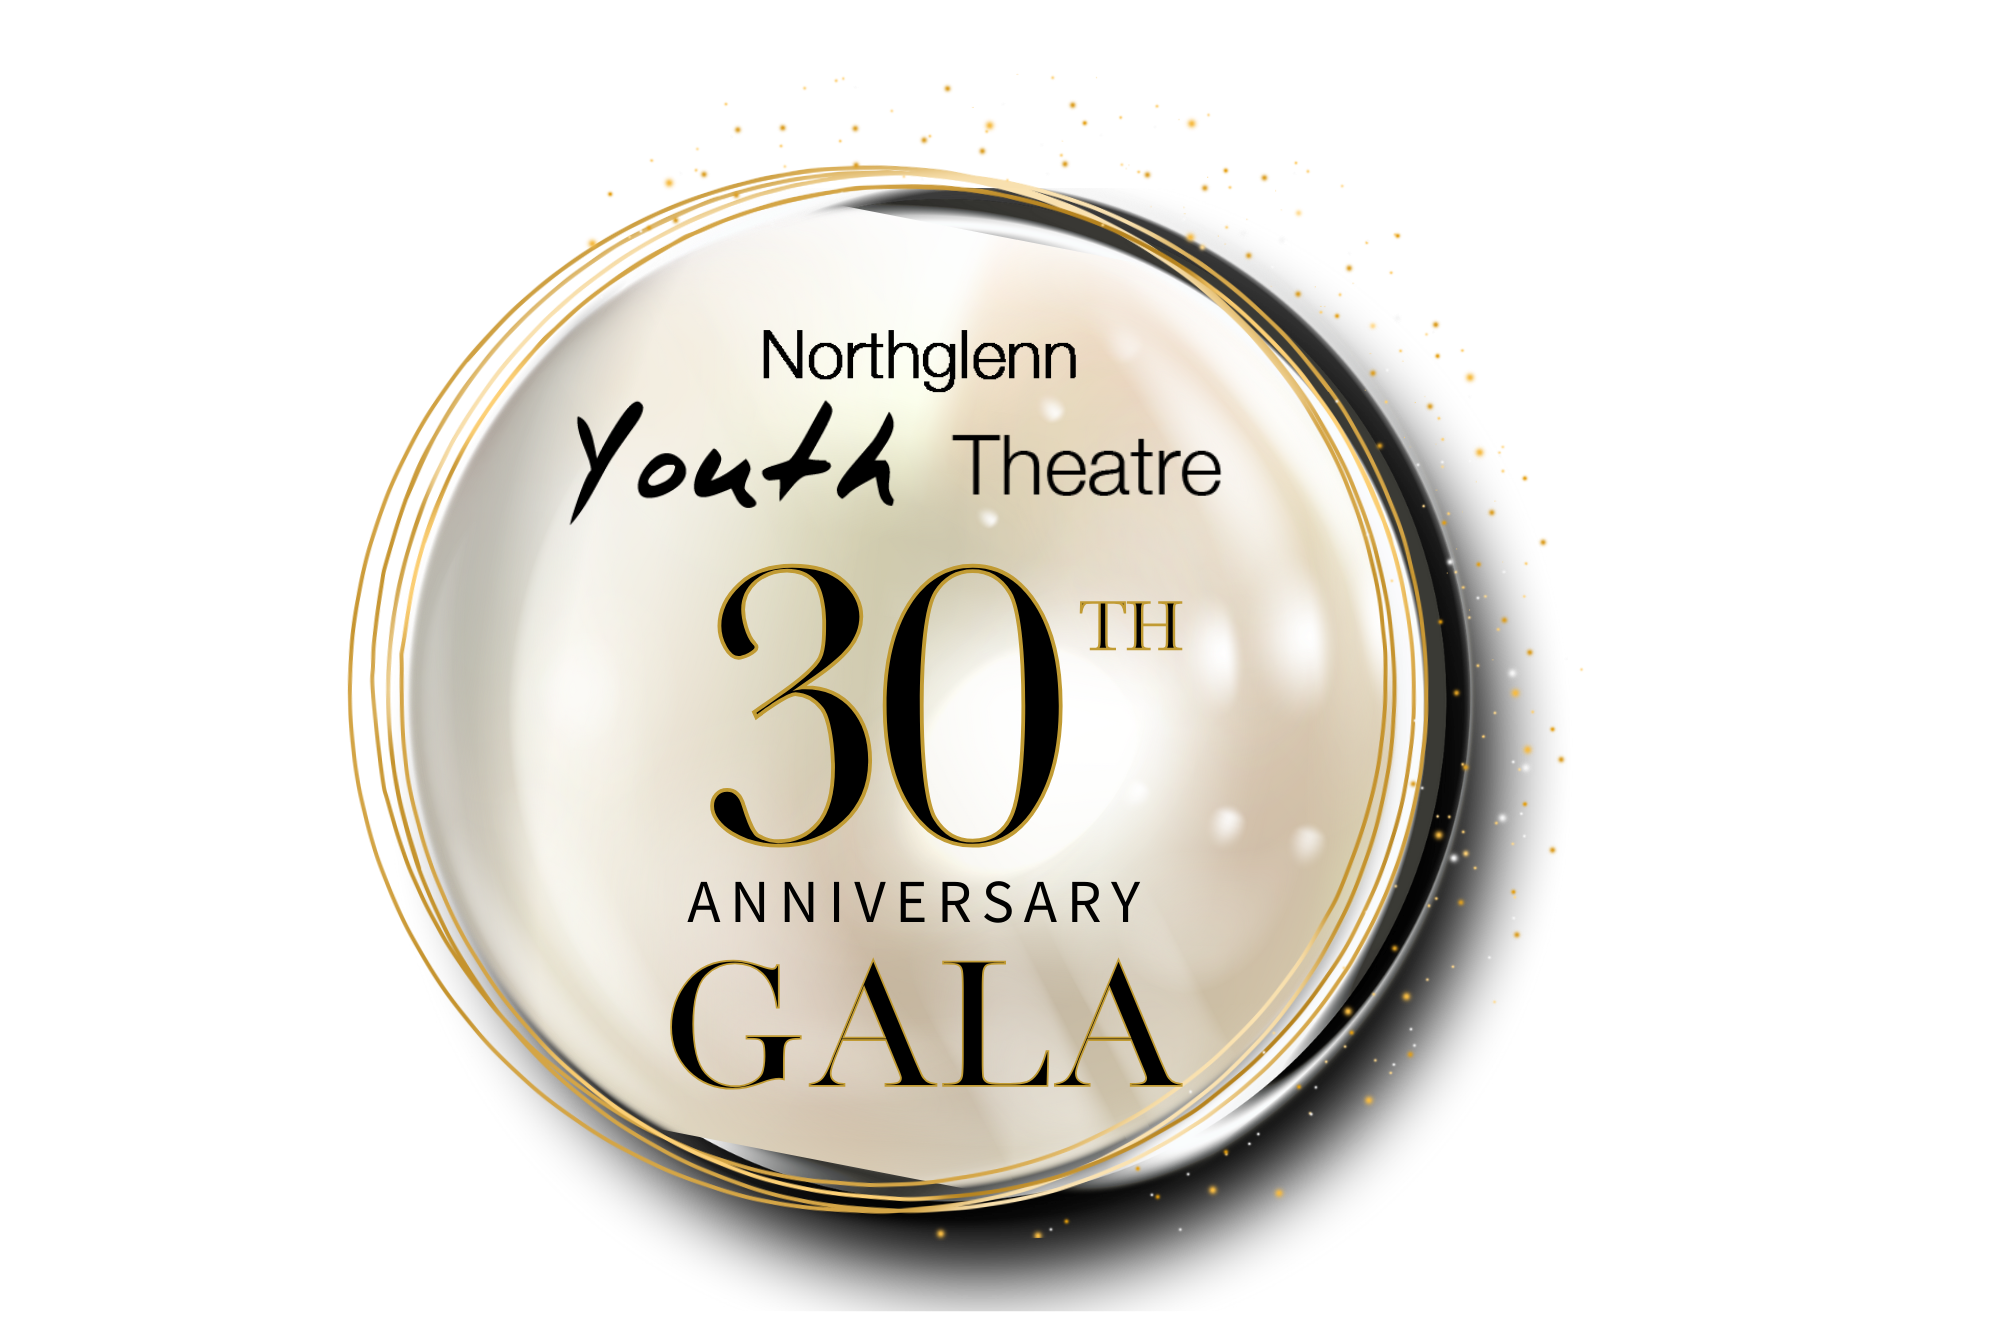 A large pearl with the words "Northglenn Youth Theatre 30th Anniversary Gala" on it